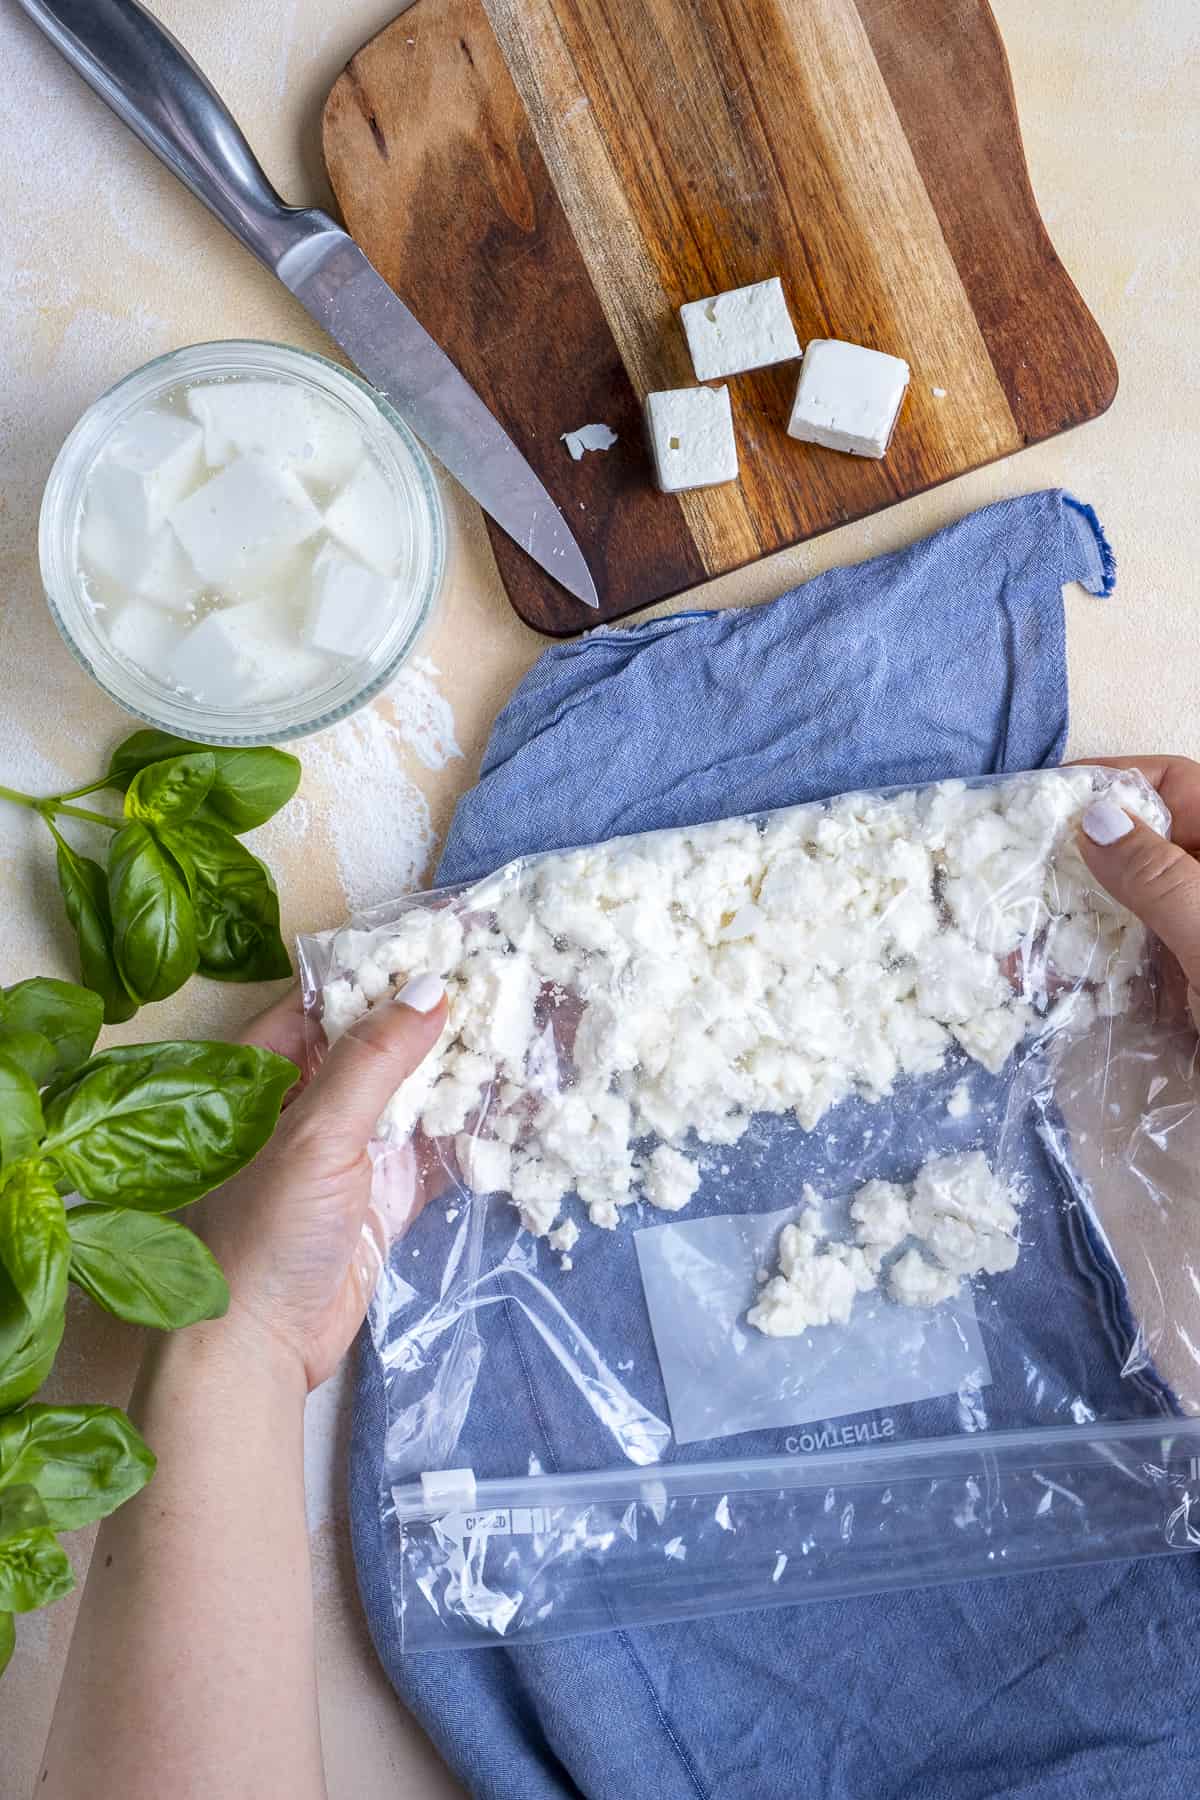 Hands showing how to crumble feta cheese in a freezer bag.